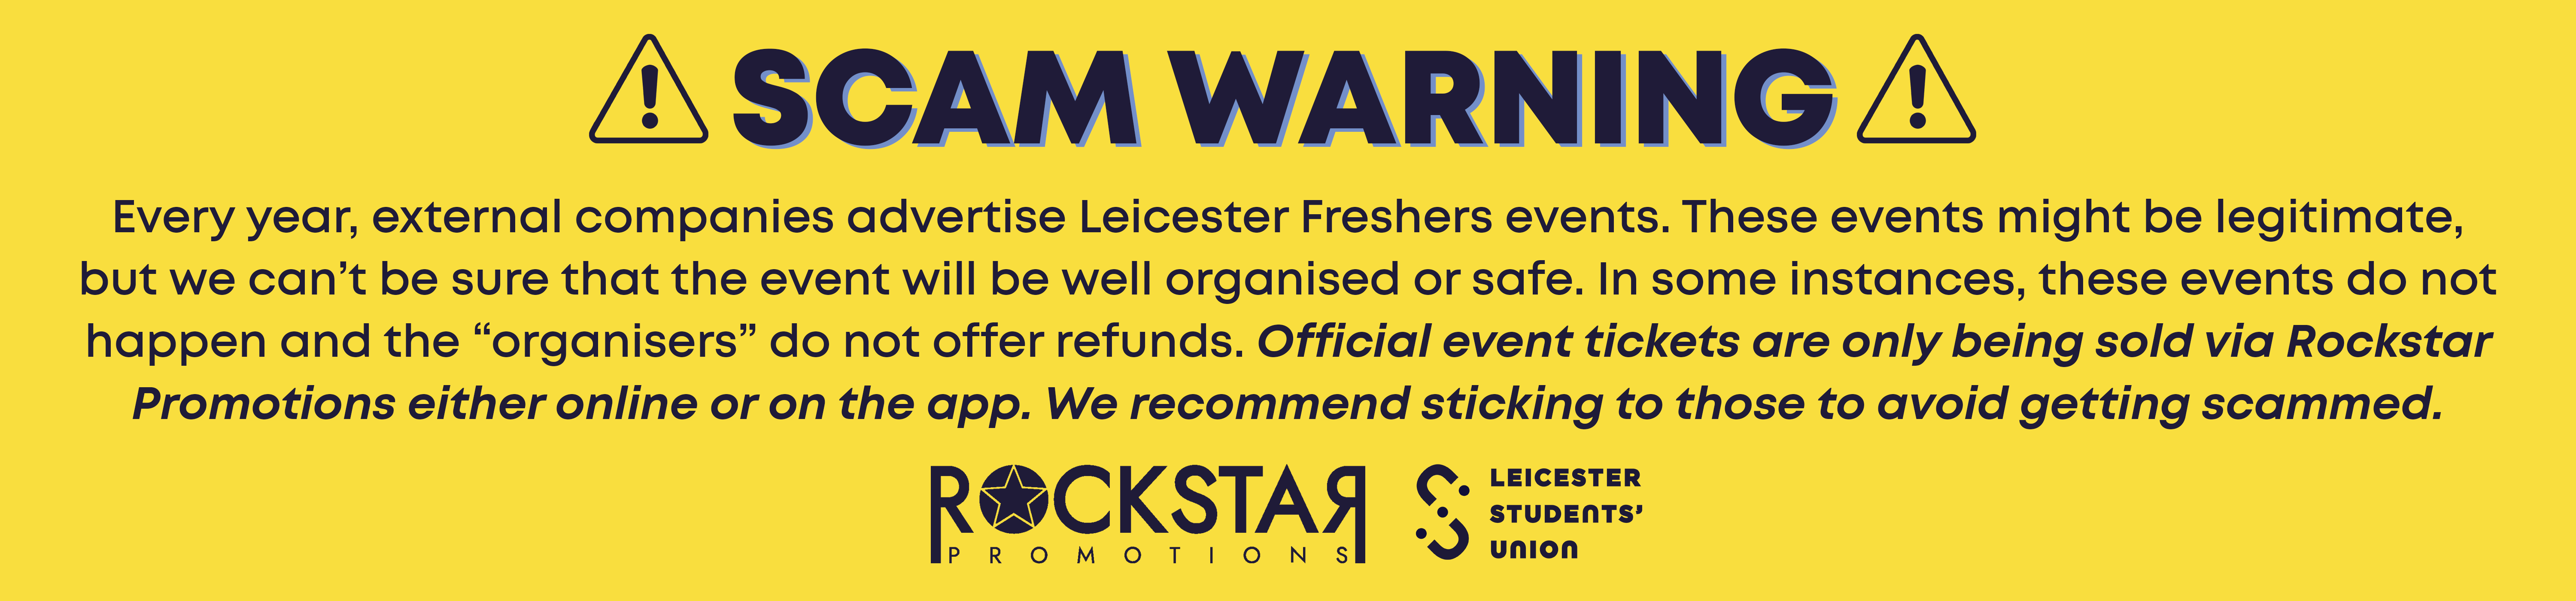 Scam Warning!: Every year, external companies advertise Leicester Freshers events. These events might be legitimate, but we can’t be sure that the event will be well organised or safe. In some instances, these events do not happen and the “organisers” do not offer refunds. Official event tickets are only being sold via Rockstar Promotions either online or on the app. We recommend sticking to those to avoid getting scammed.